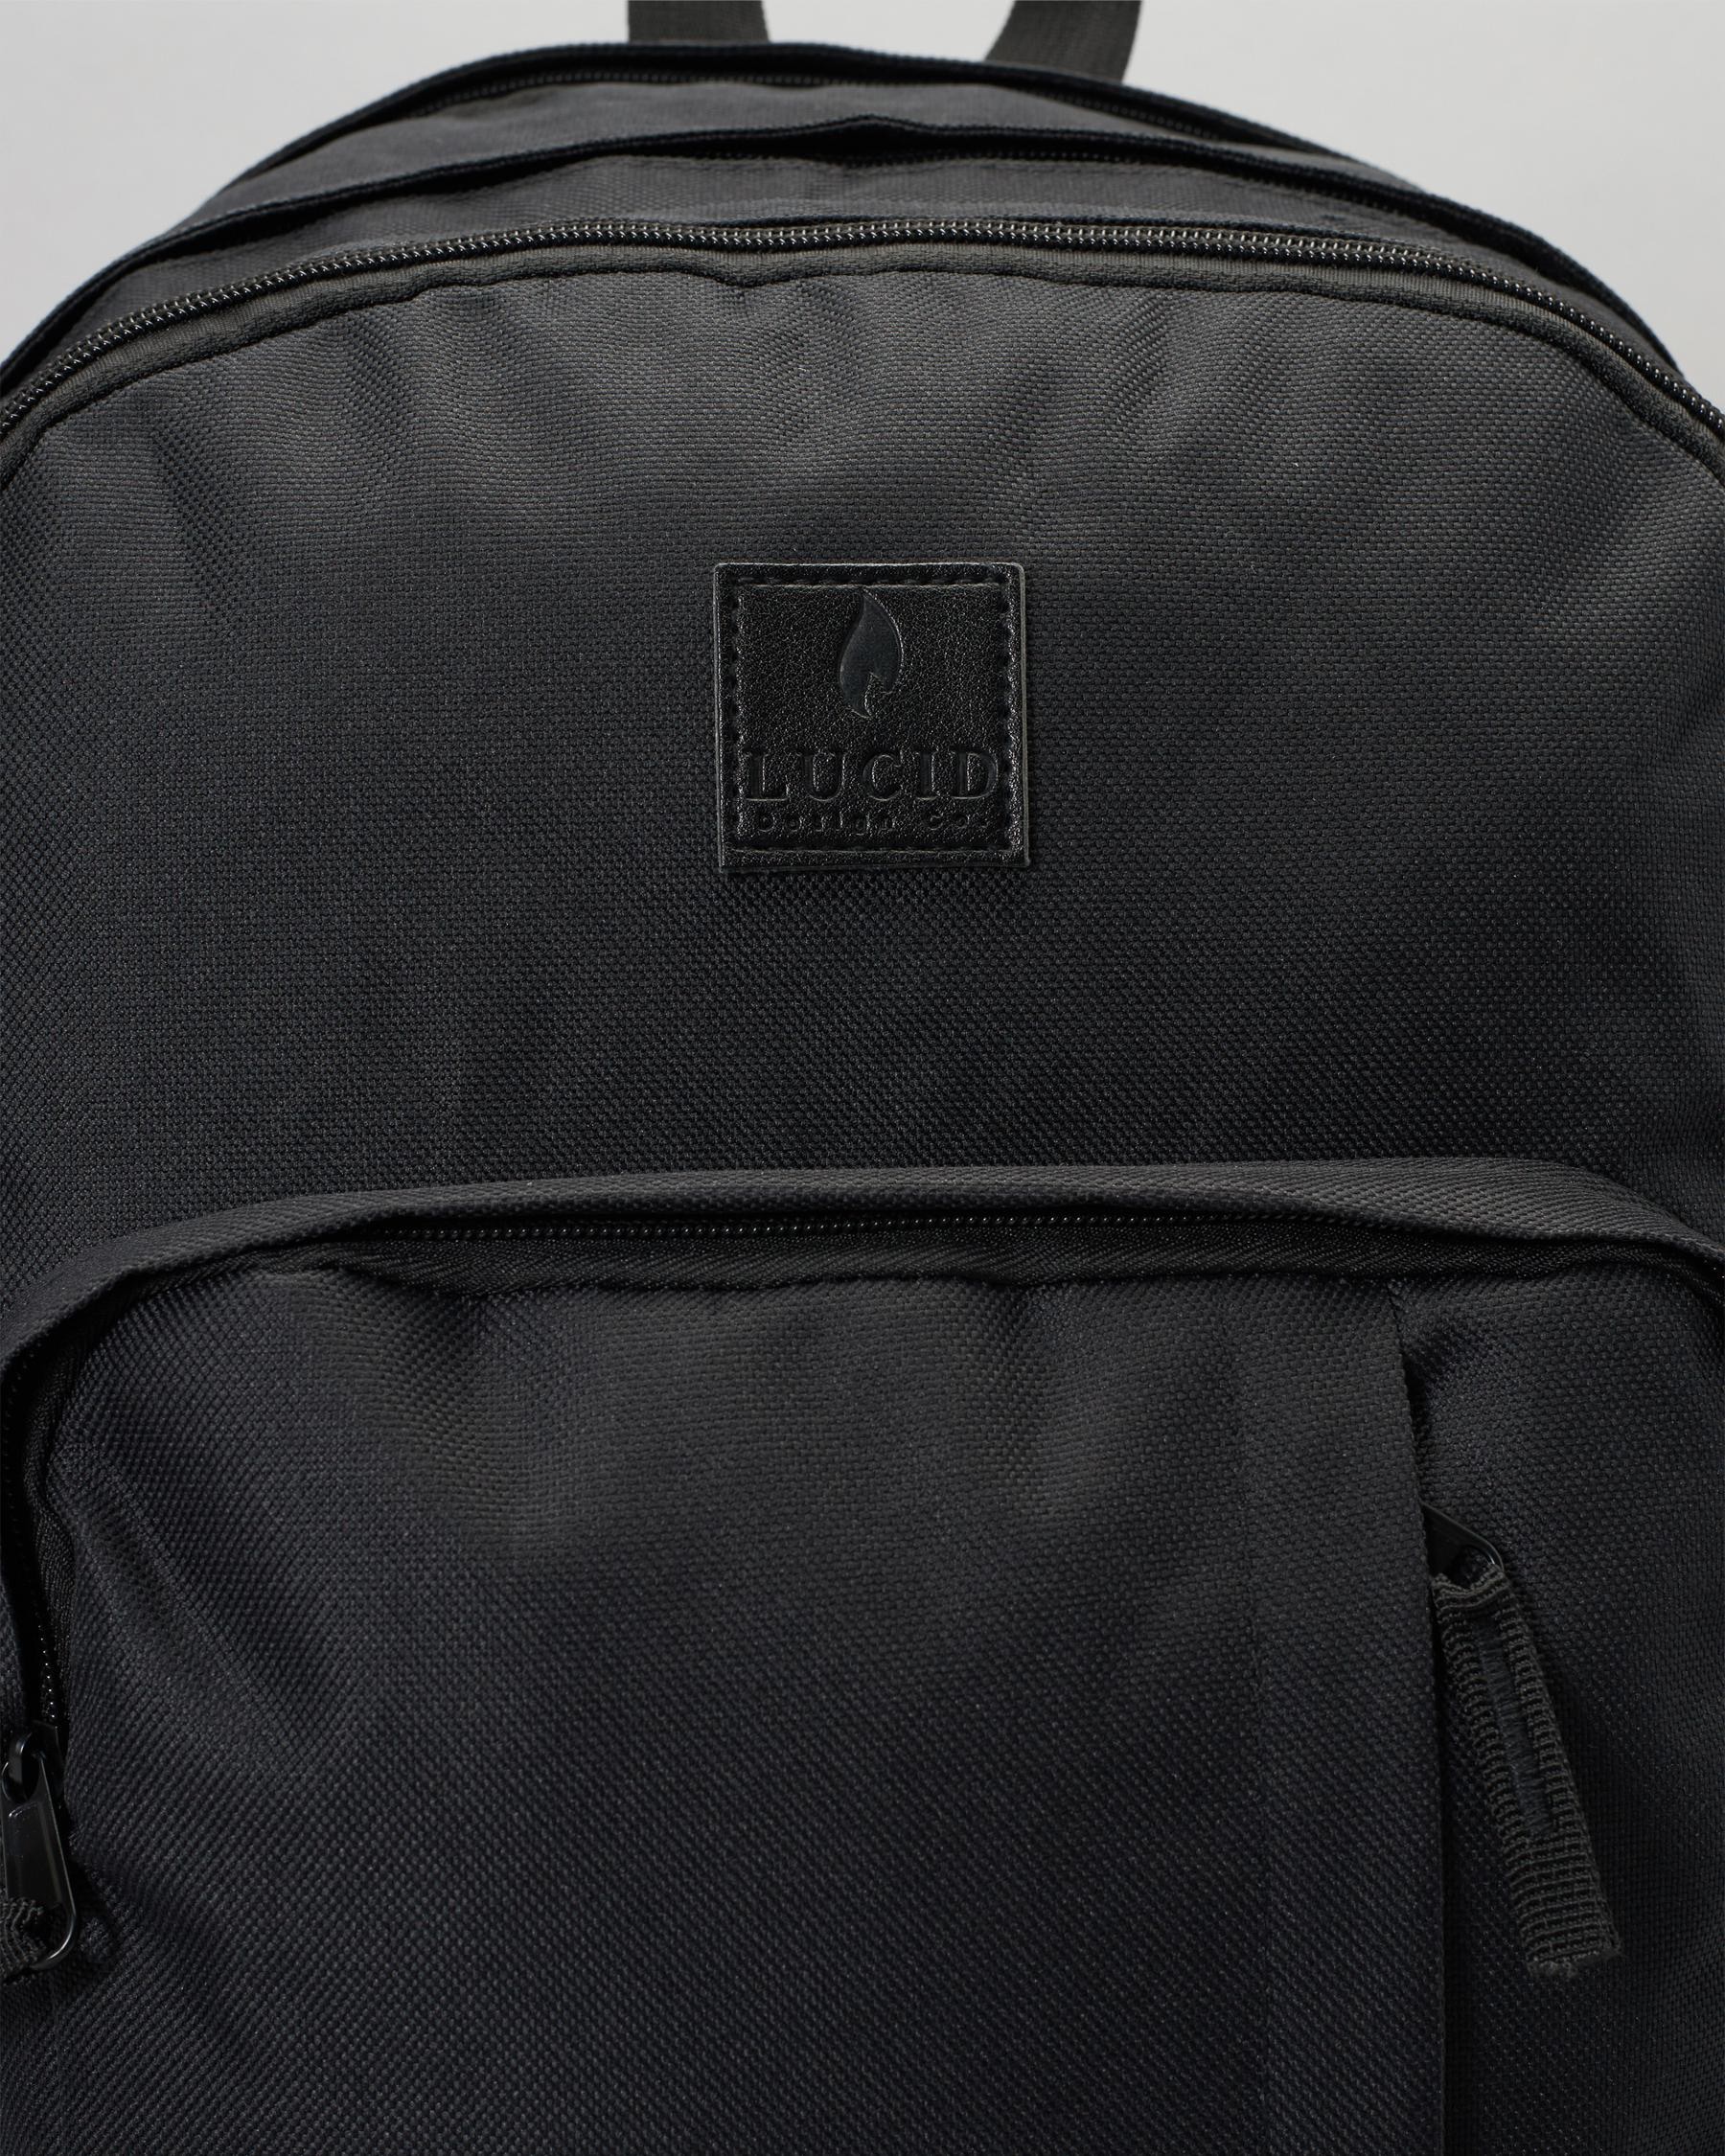 Lucid Avail Backpack In Black - FREE* Shipping & Easy Returns ...